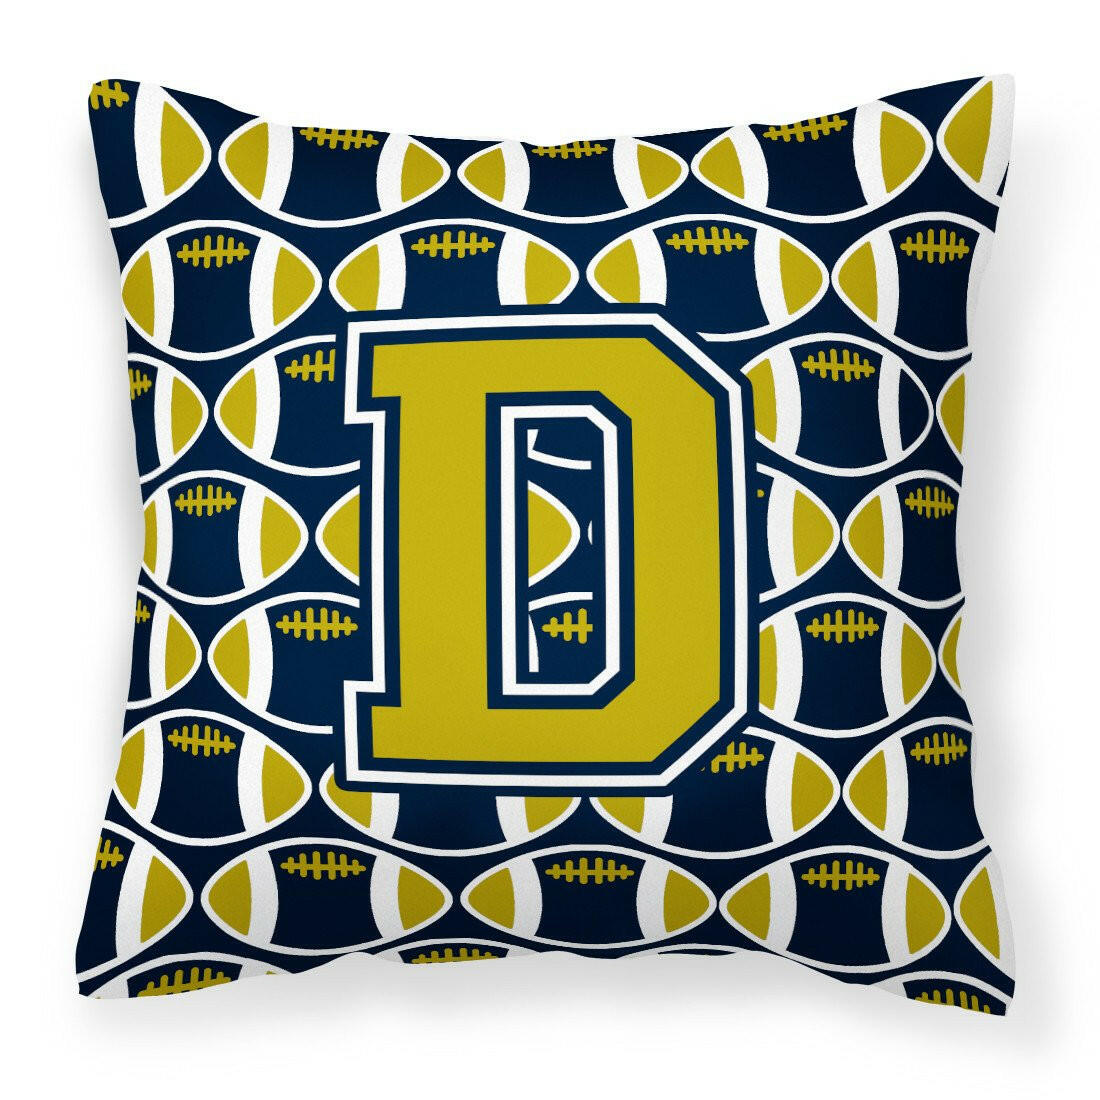 Letter D Football Blue and Gold Fabric Decorative Pillow CJ1074-DPW1414 by Caroline's Treasures